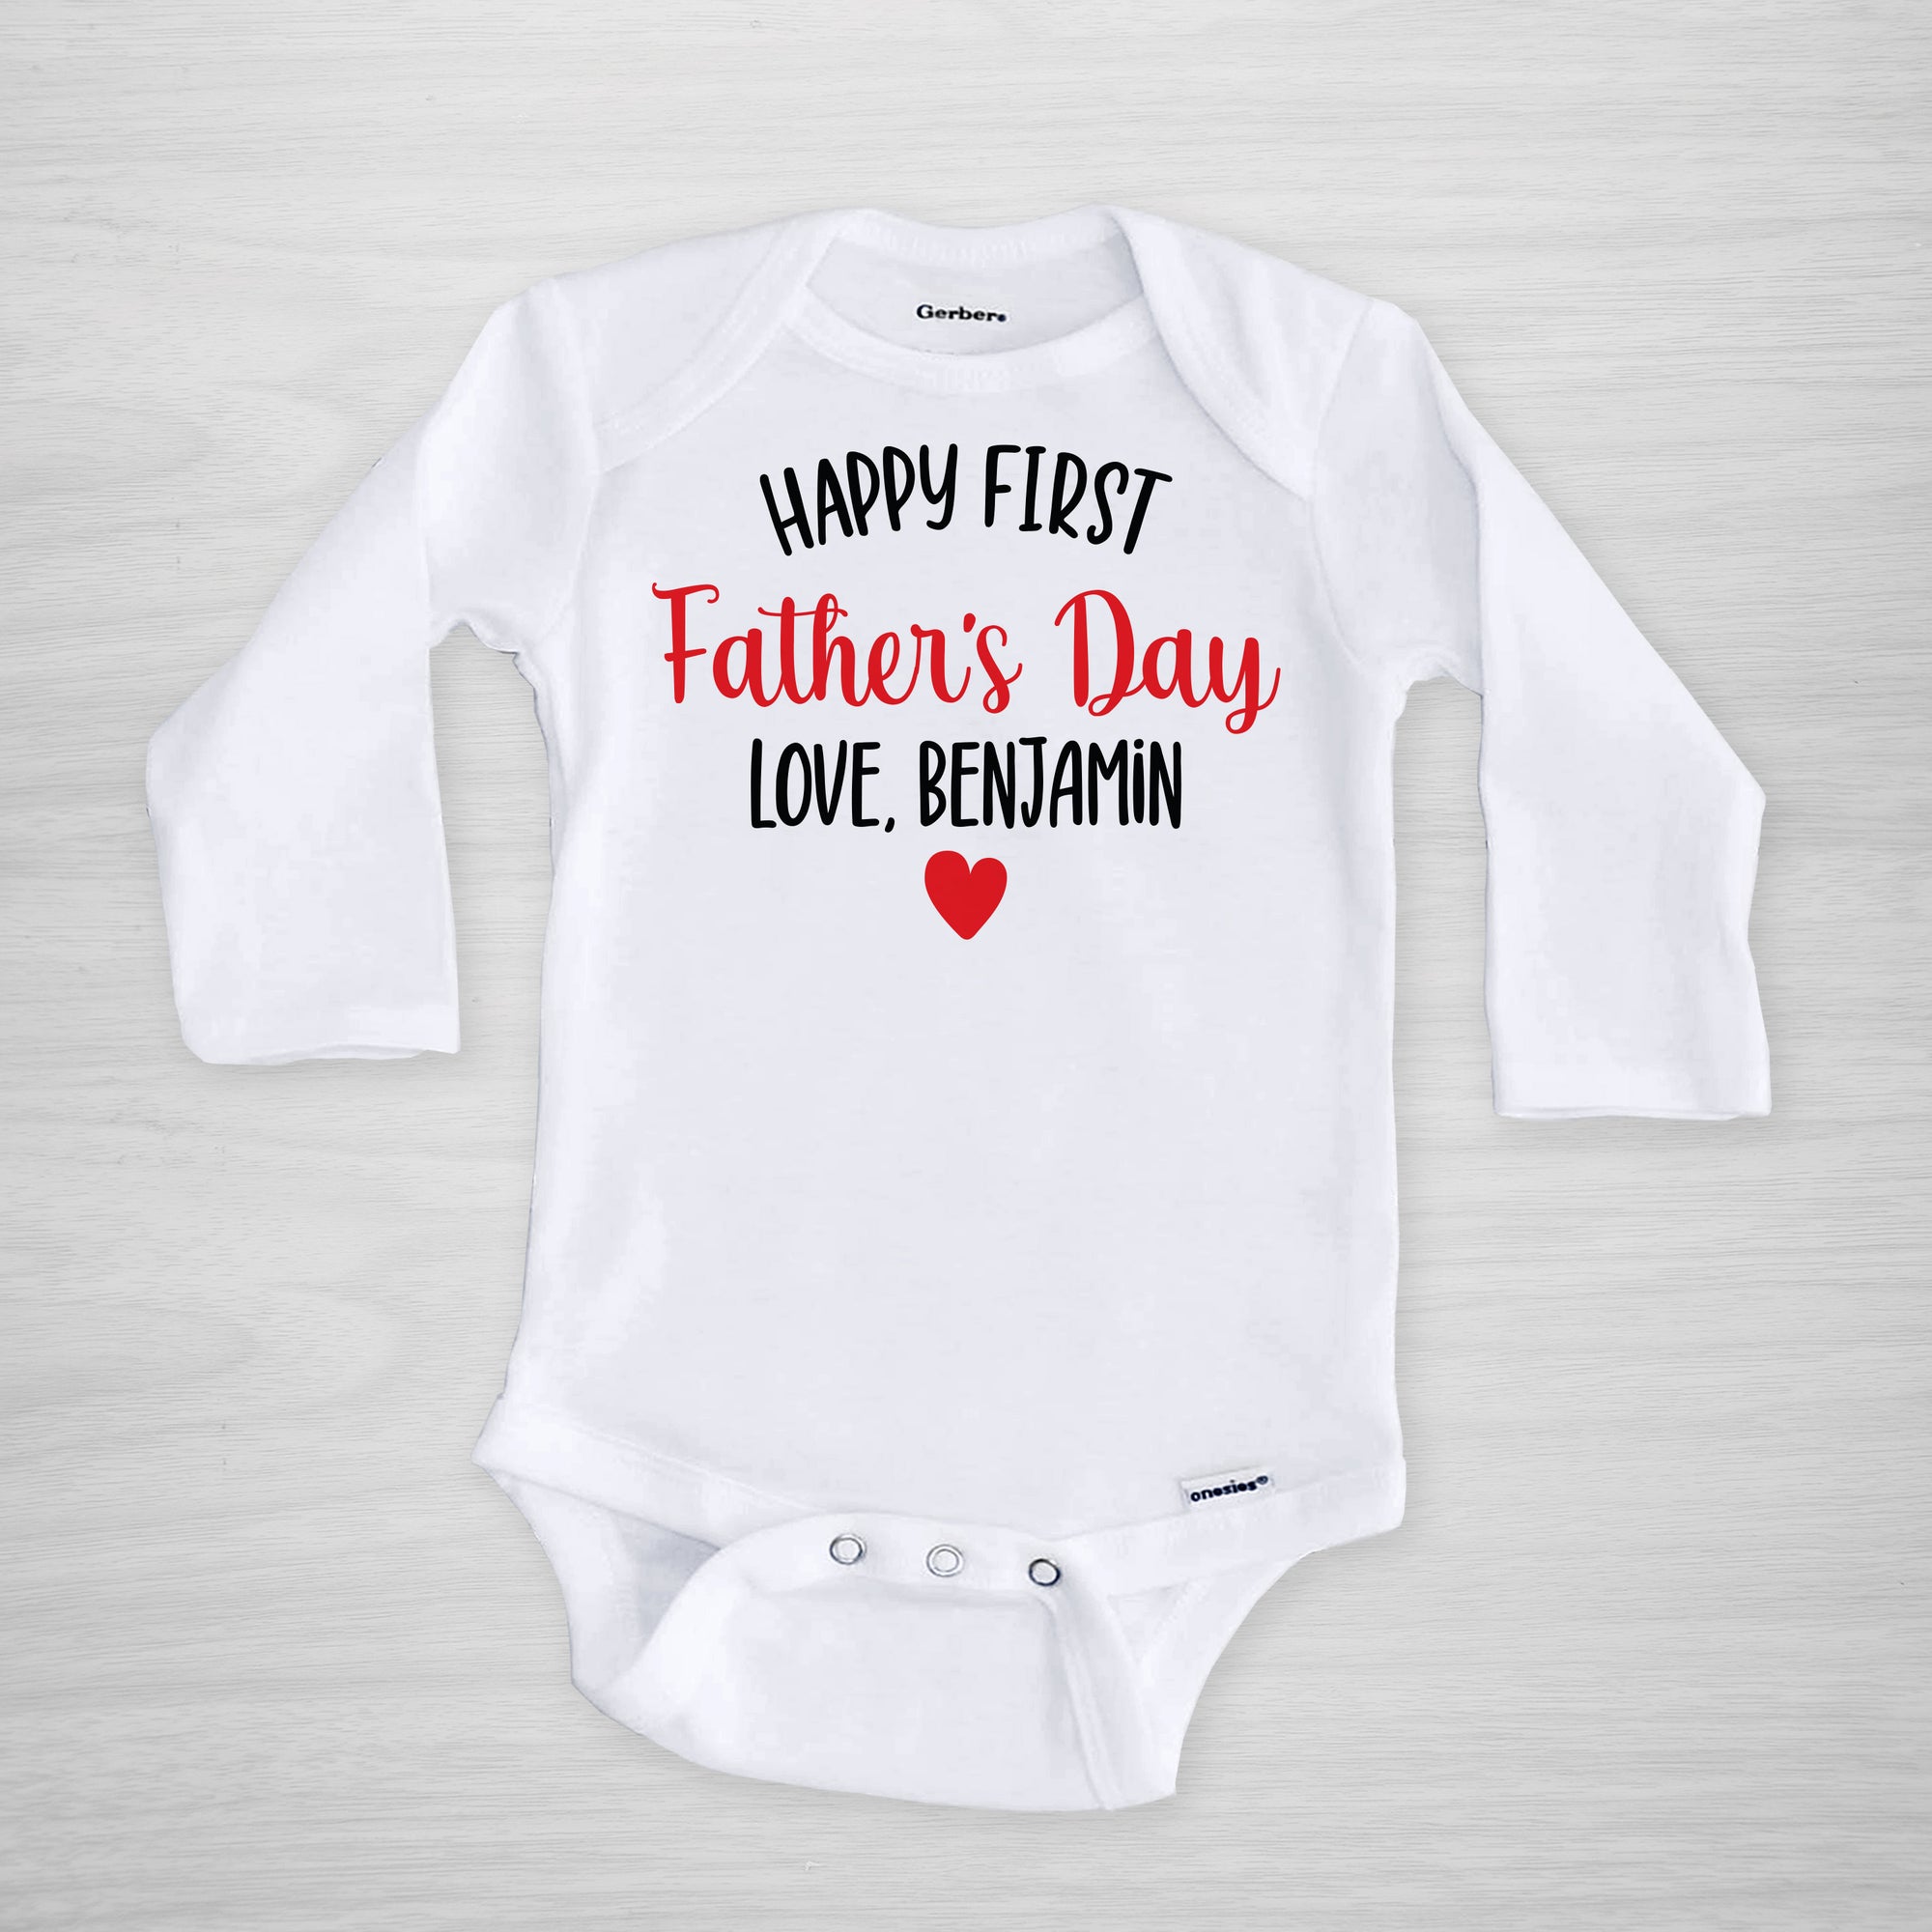 Happy first father's day onesie, personalized with the baby's name, long sleeved